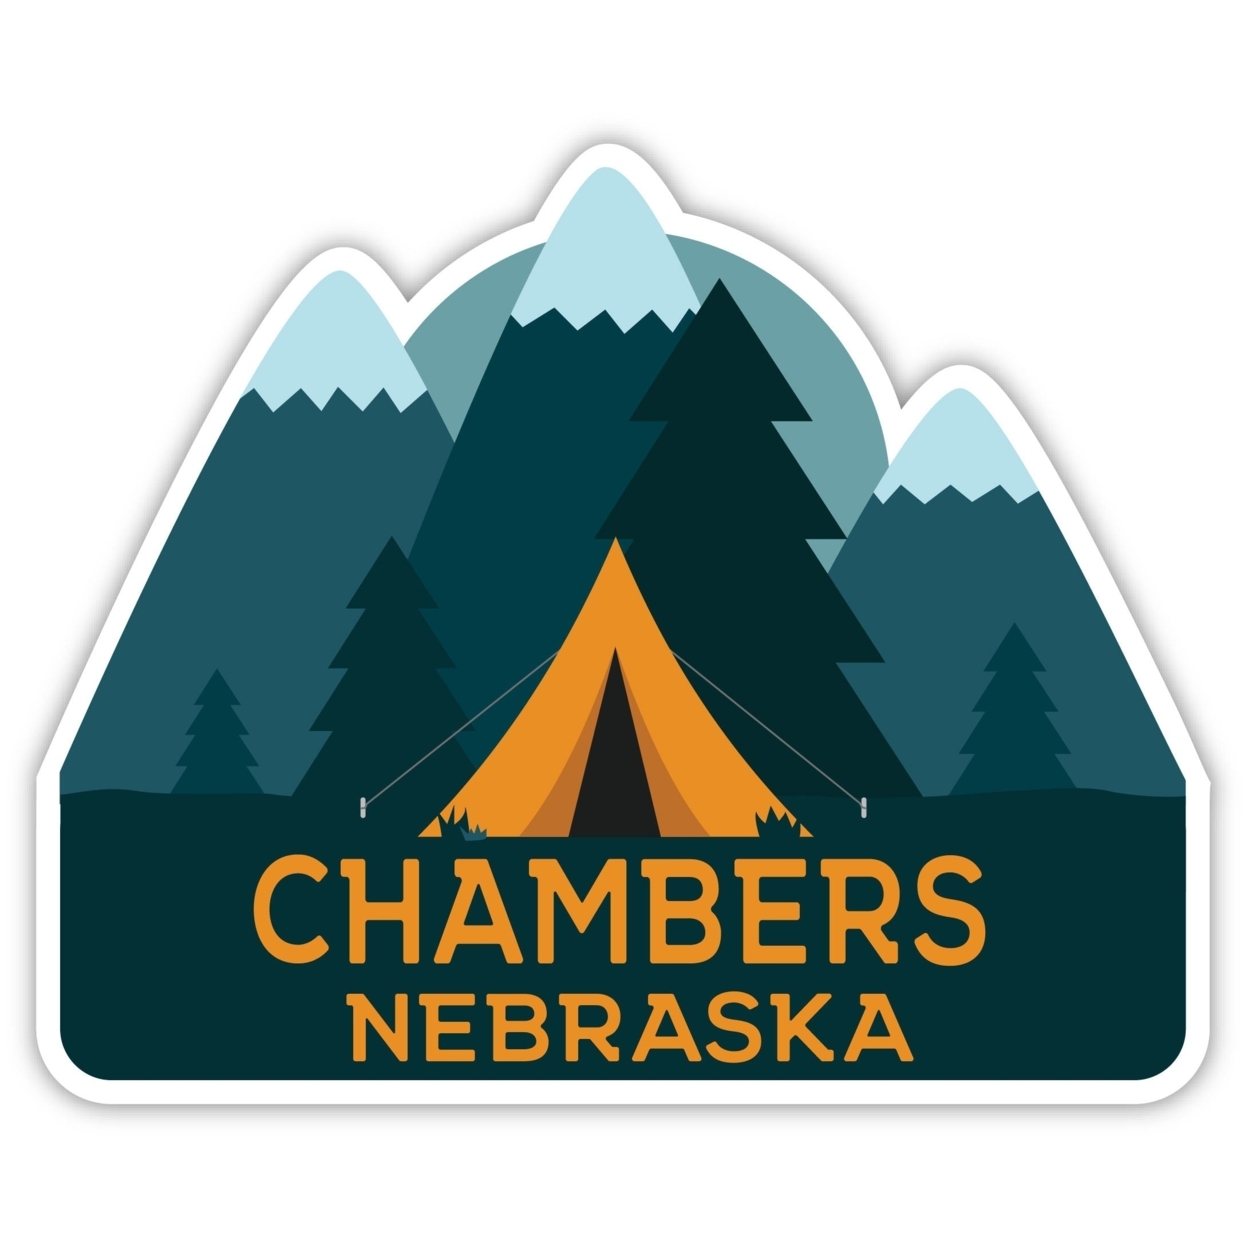 Chambers Nebraska Souvenir Decorative Stickers (Choose Theme And Size) - 4-Pack, 8-Inch, Tent